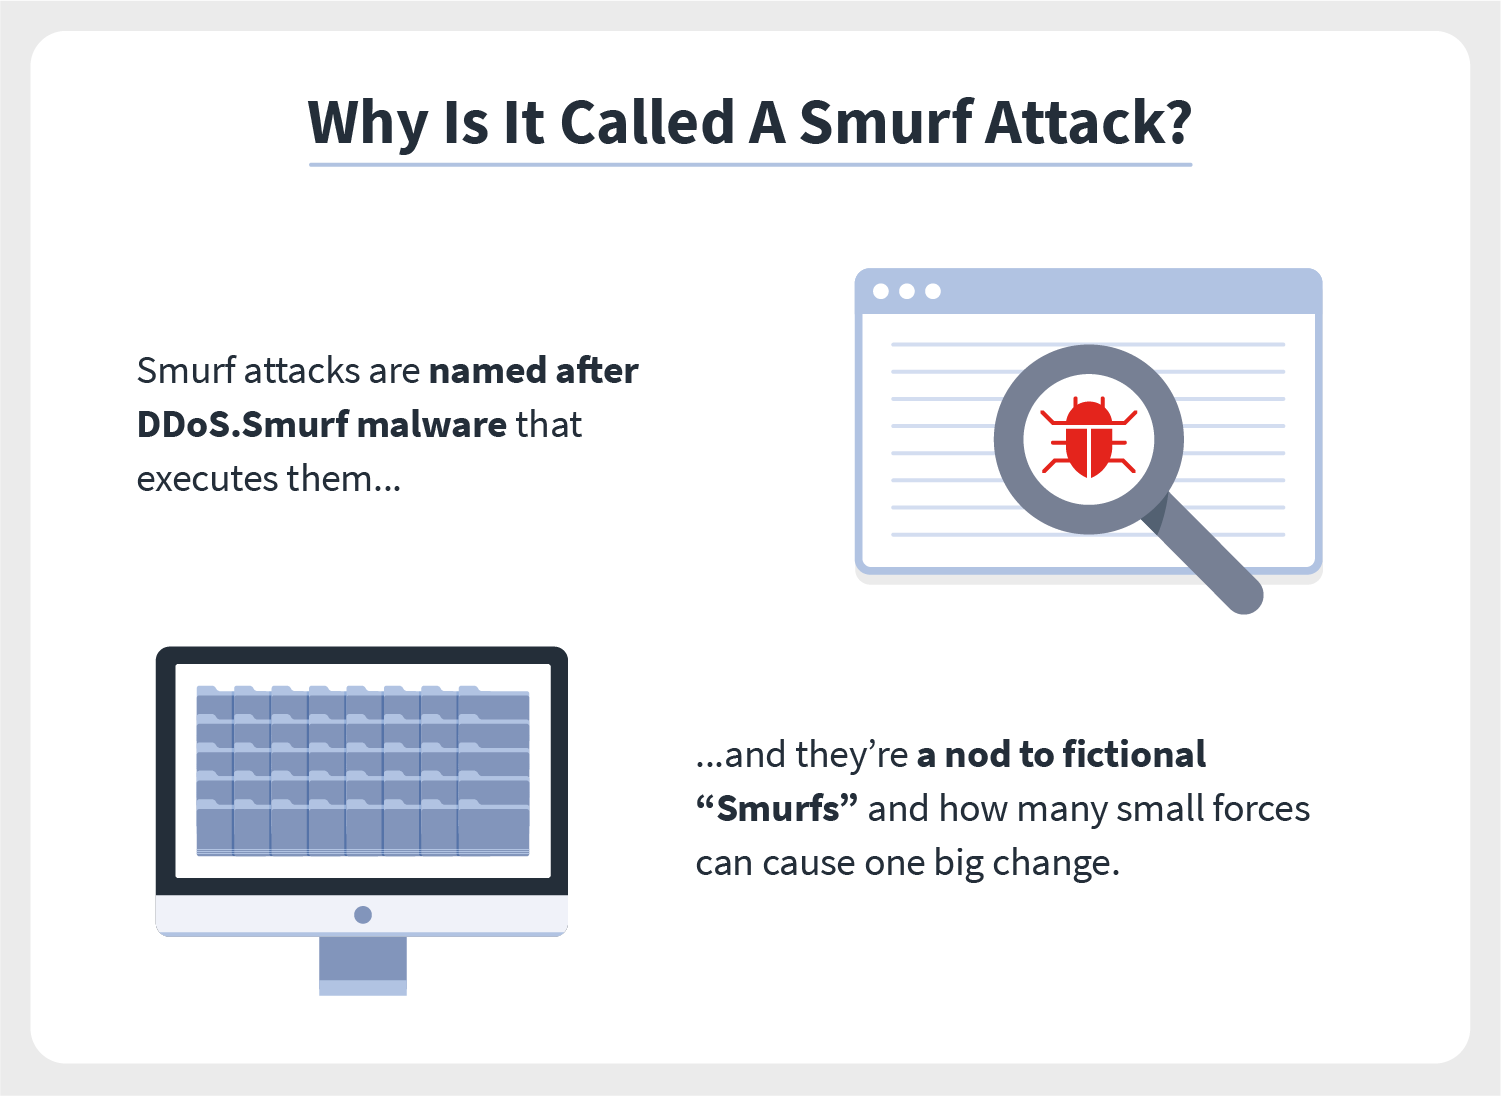 Why is it called a smurf attack